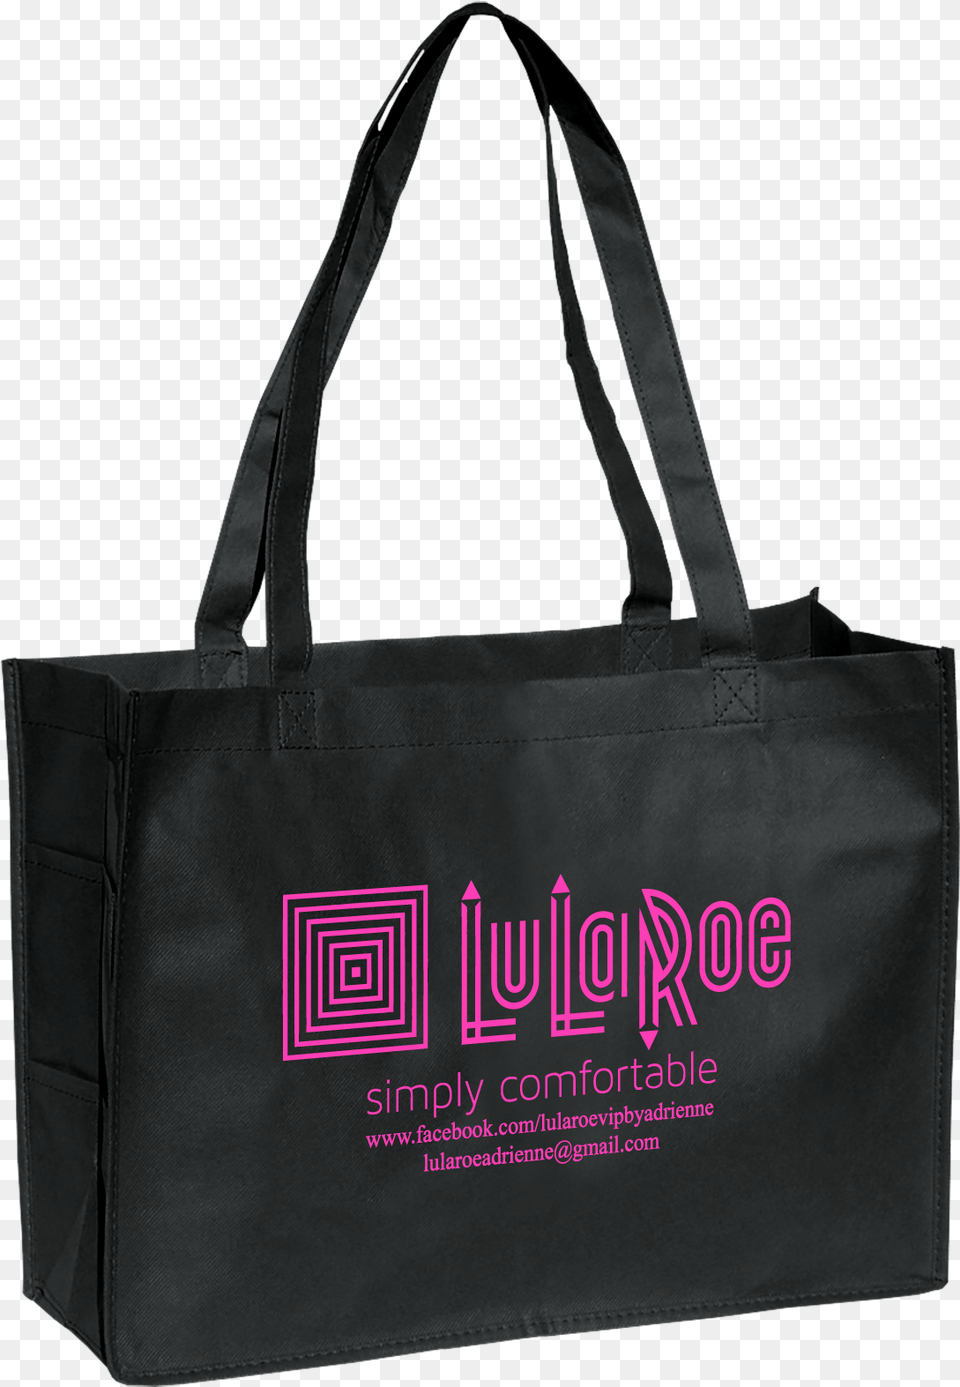 By Adrienne Convention Tote Bags Tote Bag, Accessories, Handbag, Tote Bag Png